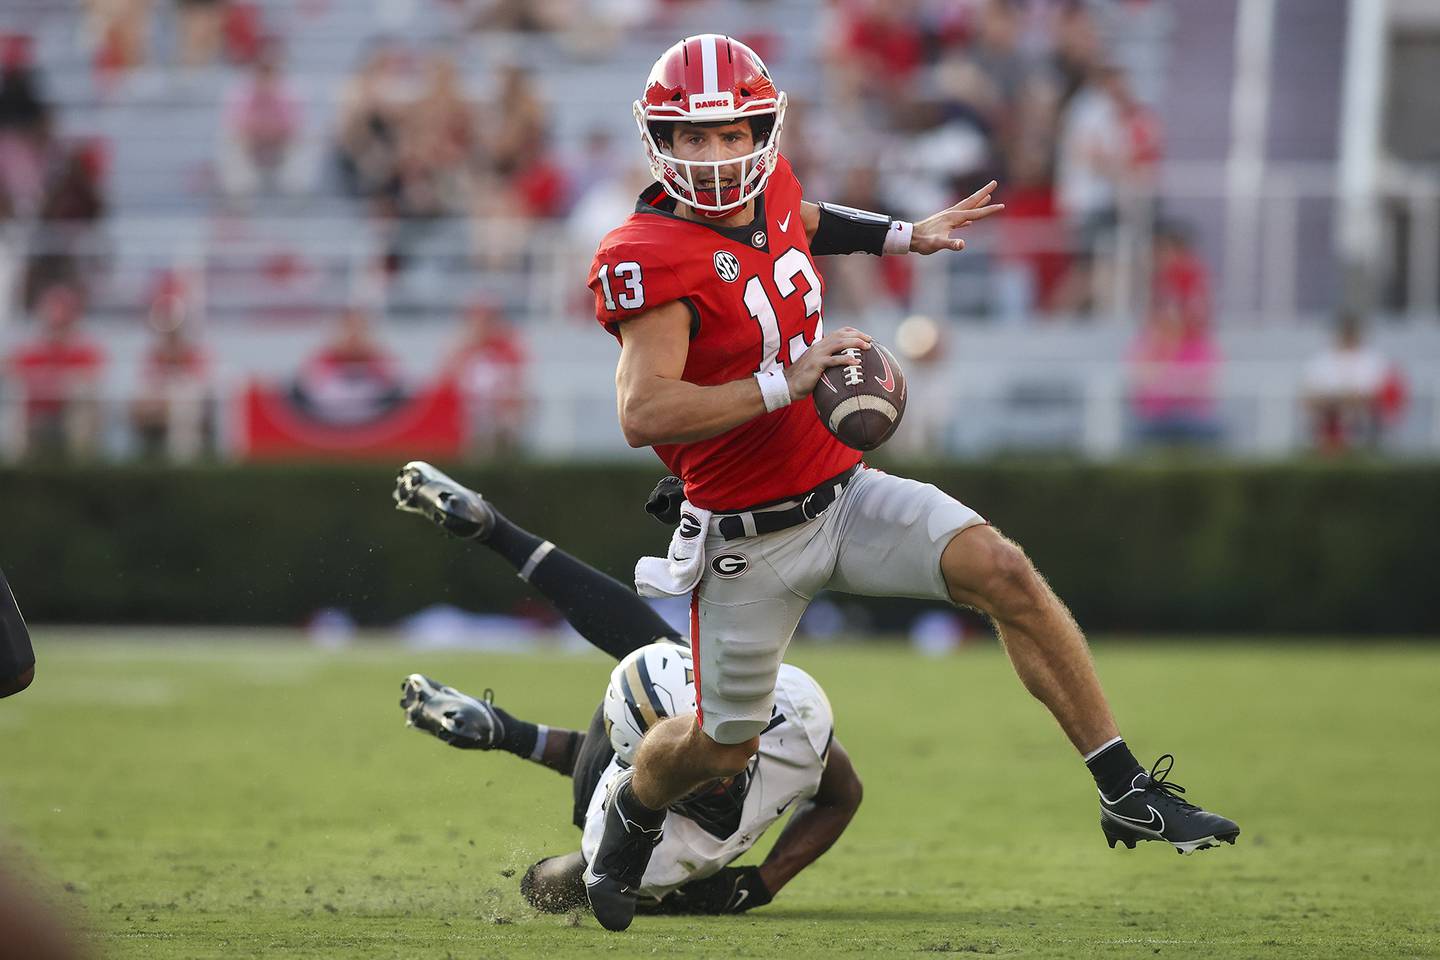 Georgia quarterback Stetson Bennett scrambles away from Vanderbilt linebacker CJ Taylor during an Oct. 15 game. The Bulldogs will face Ohio State in the Peach Bowl on Saturday in a College Football Playoff semifinal.